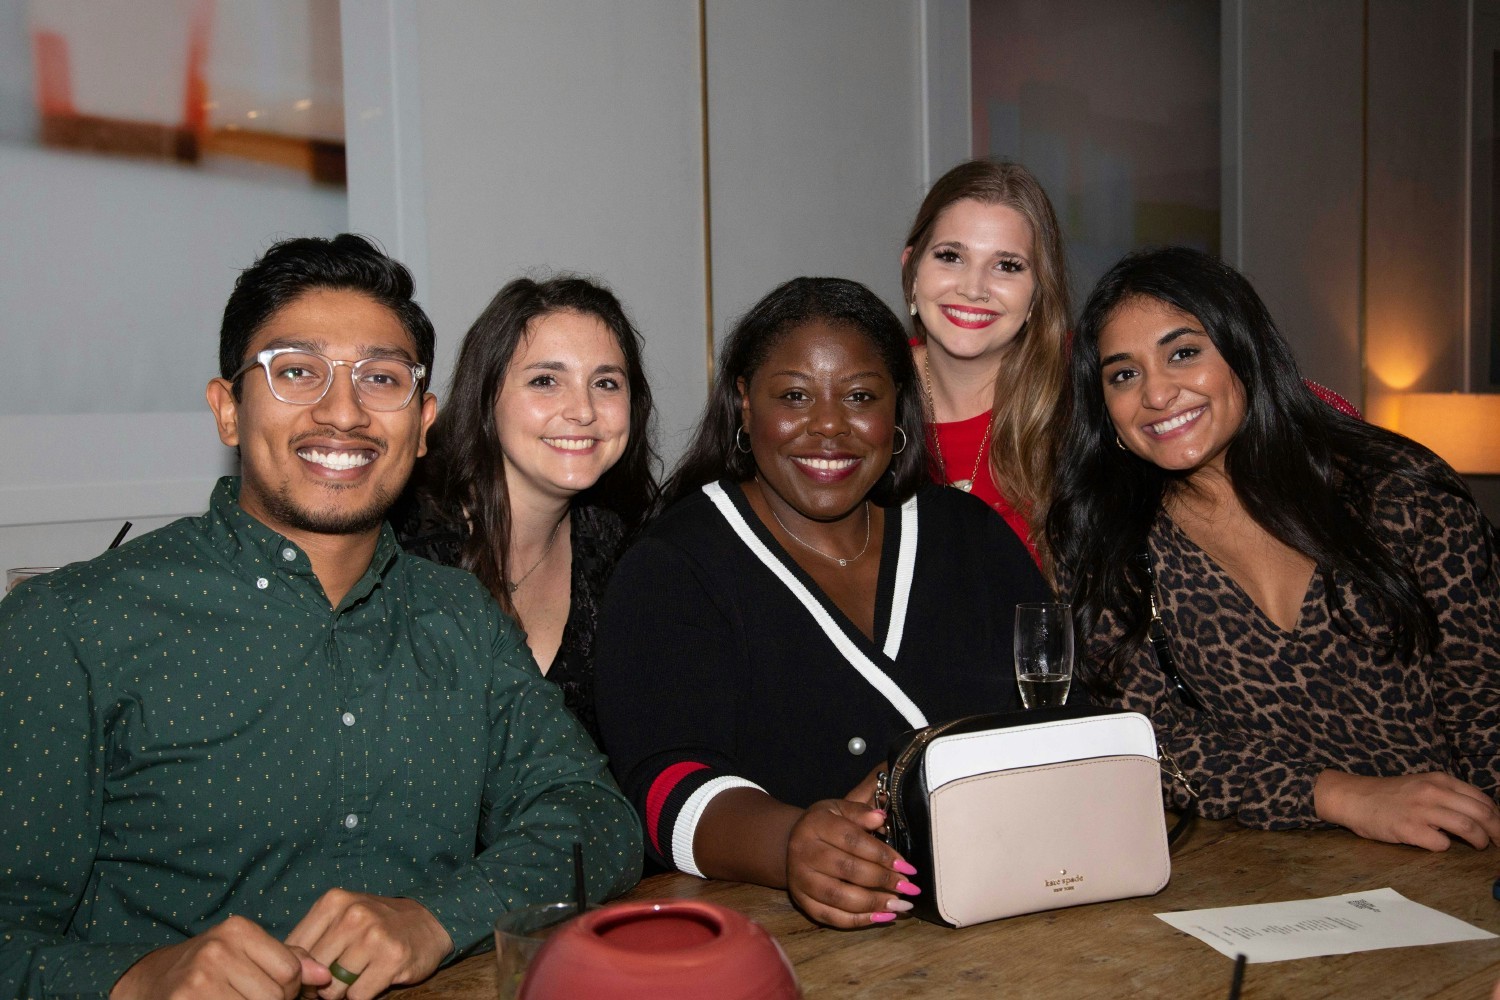 Members of the #SpruceCrew at last year's holiday party.